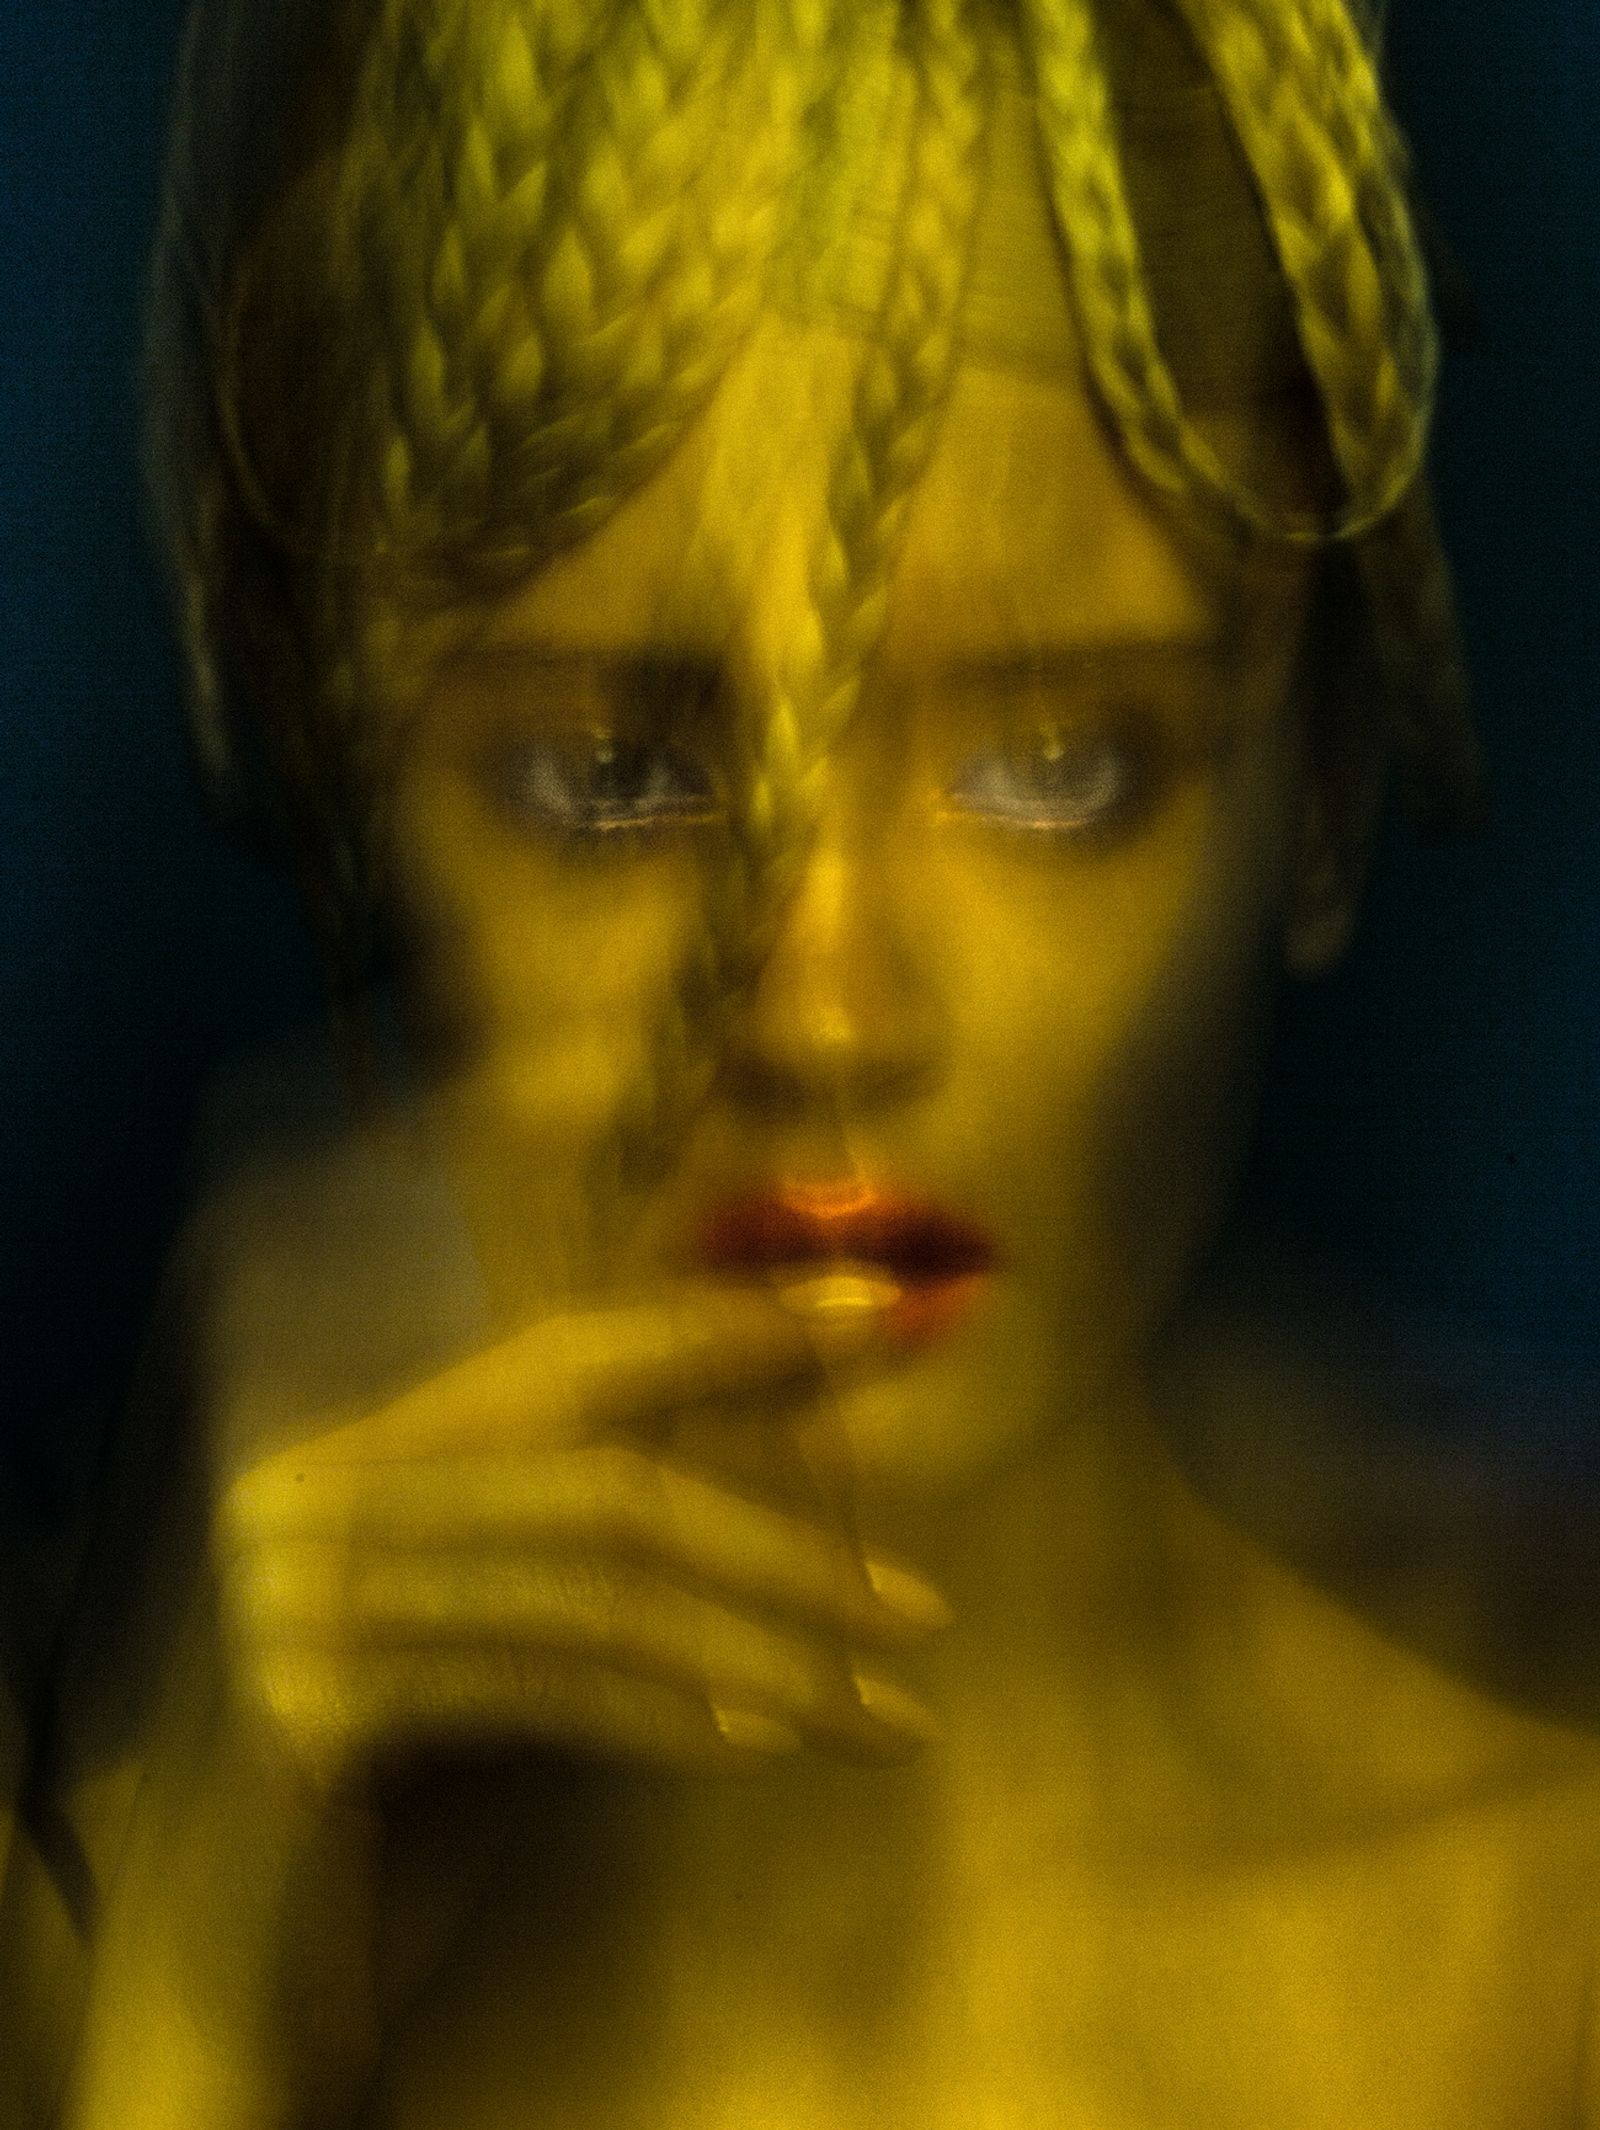 © Victoria Viprada Balaban - Image from the Color Therapy photography project